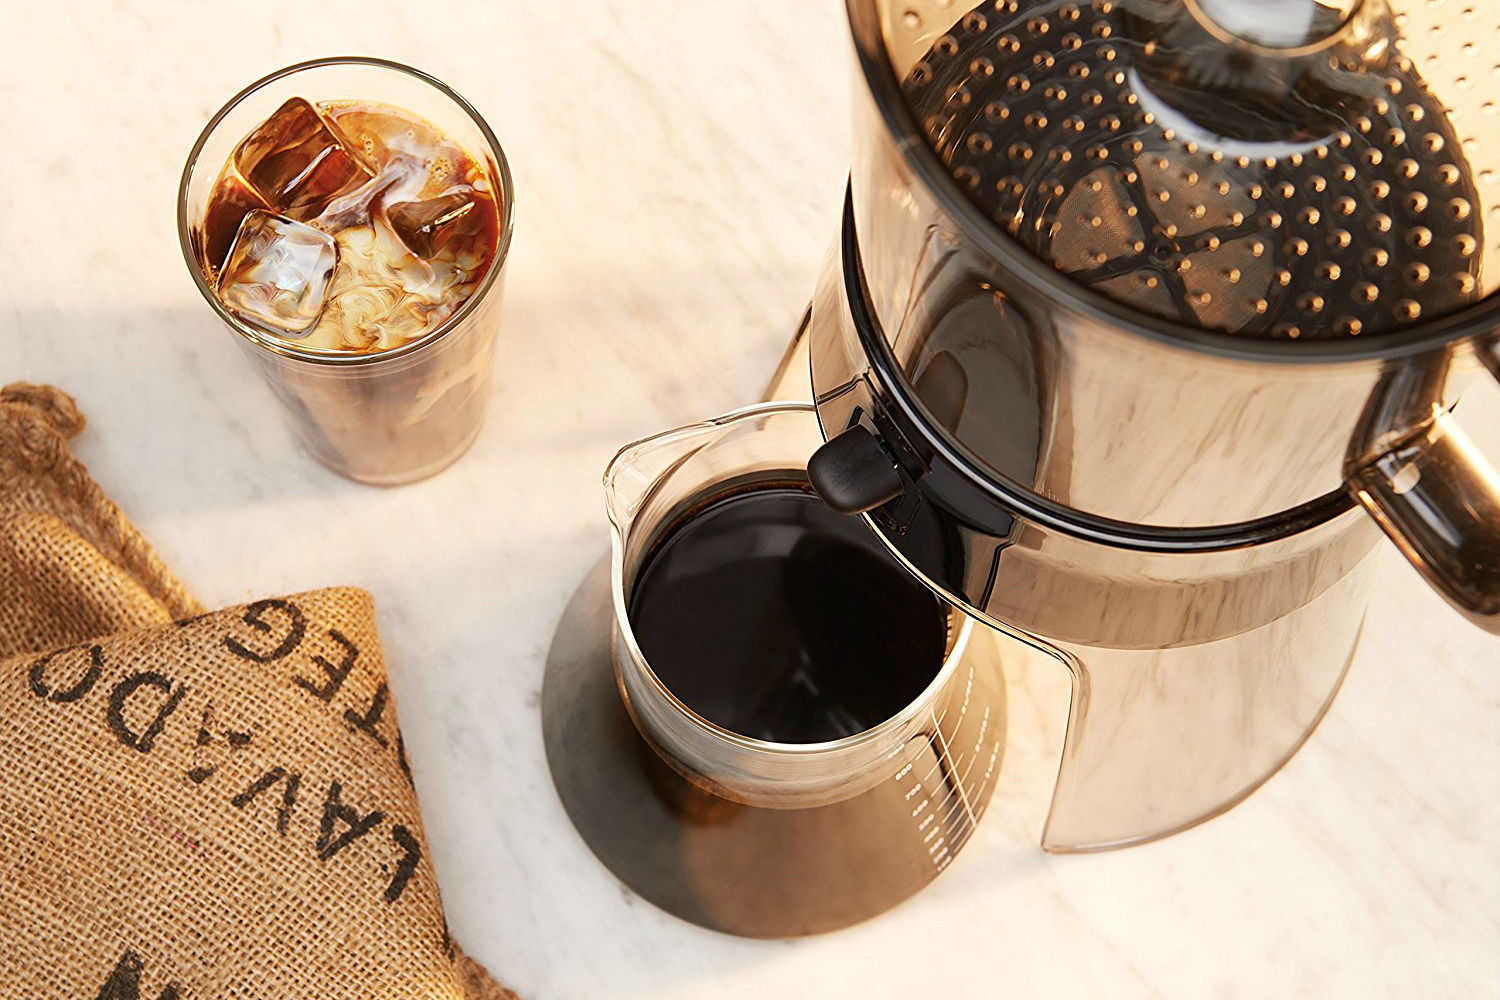 How to choose a Cold Brew Coffee Maker and Which Cold Brew Coffee Maker is  the Best? - That's Cold Brew Coffee